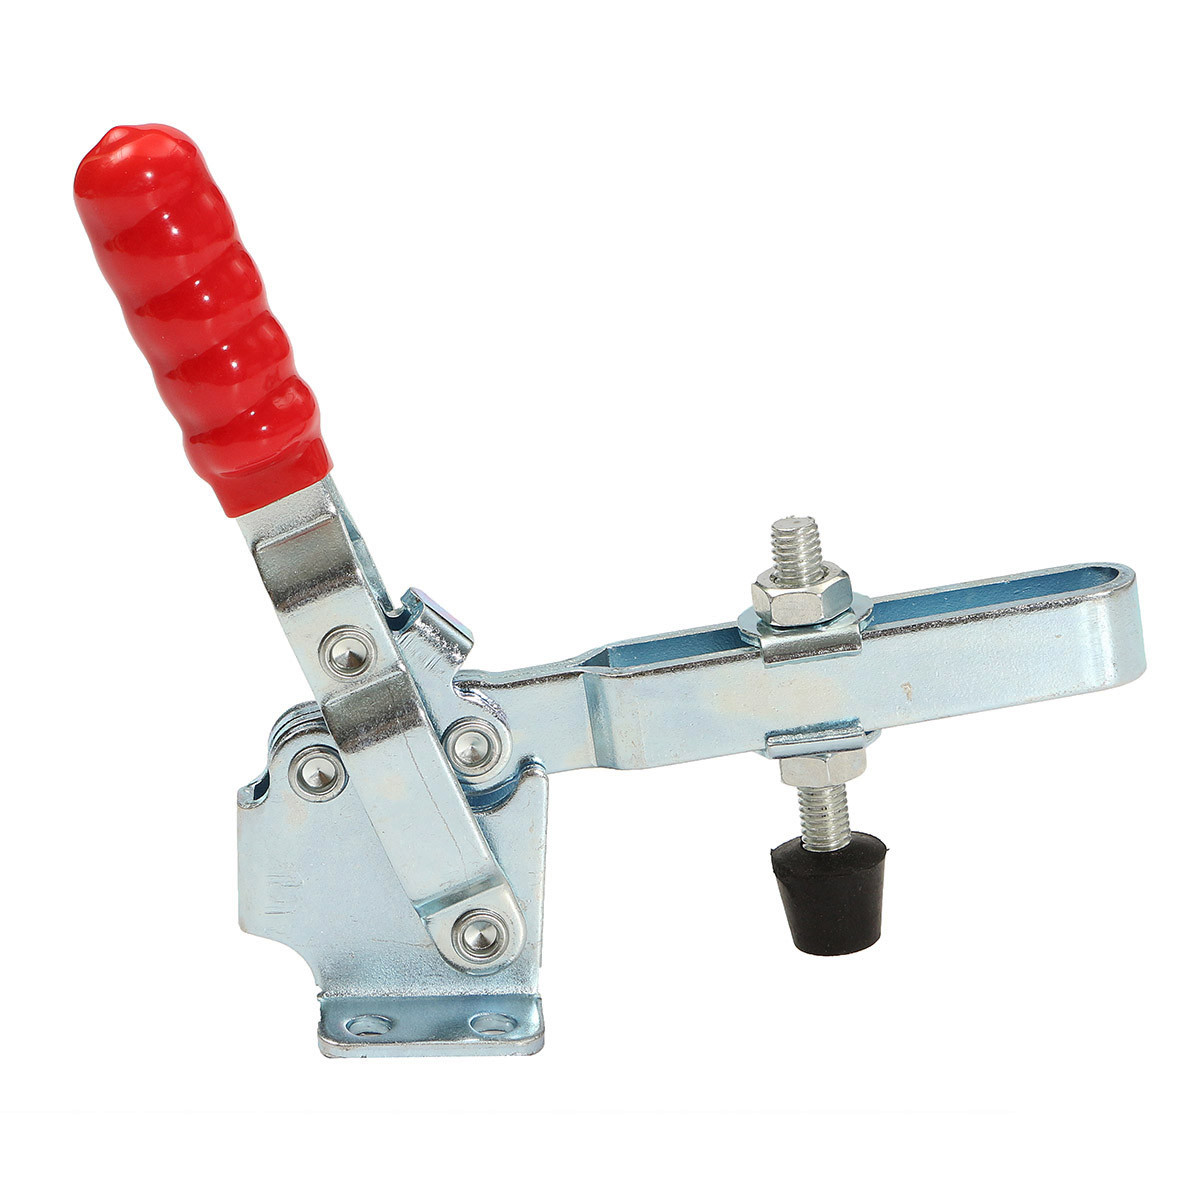 227KG-Holding-Capacity-Quick-Release-U-Bar-Hand-Tool-Vertical-Type-Toggle-Clamp-1103853-3